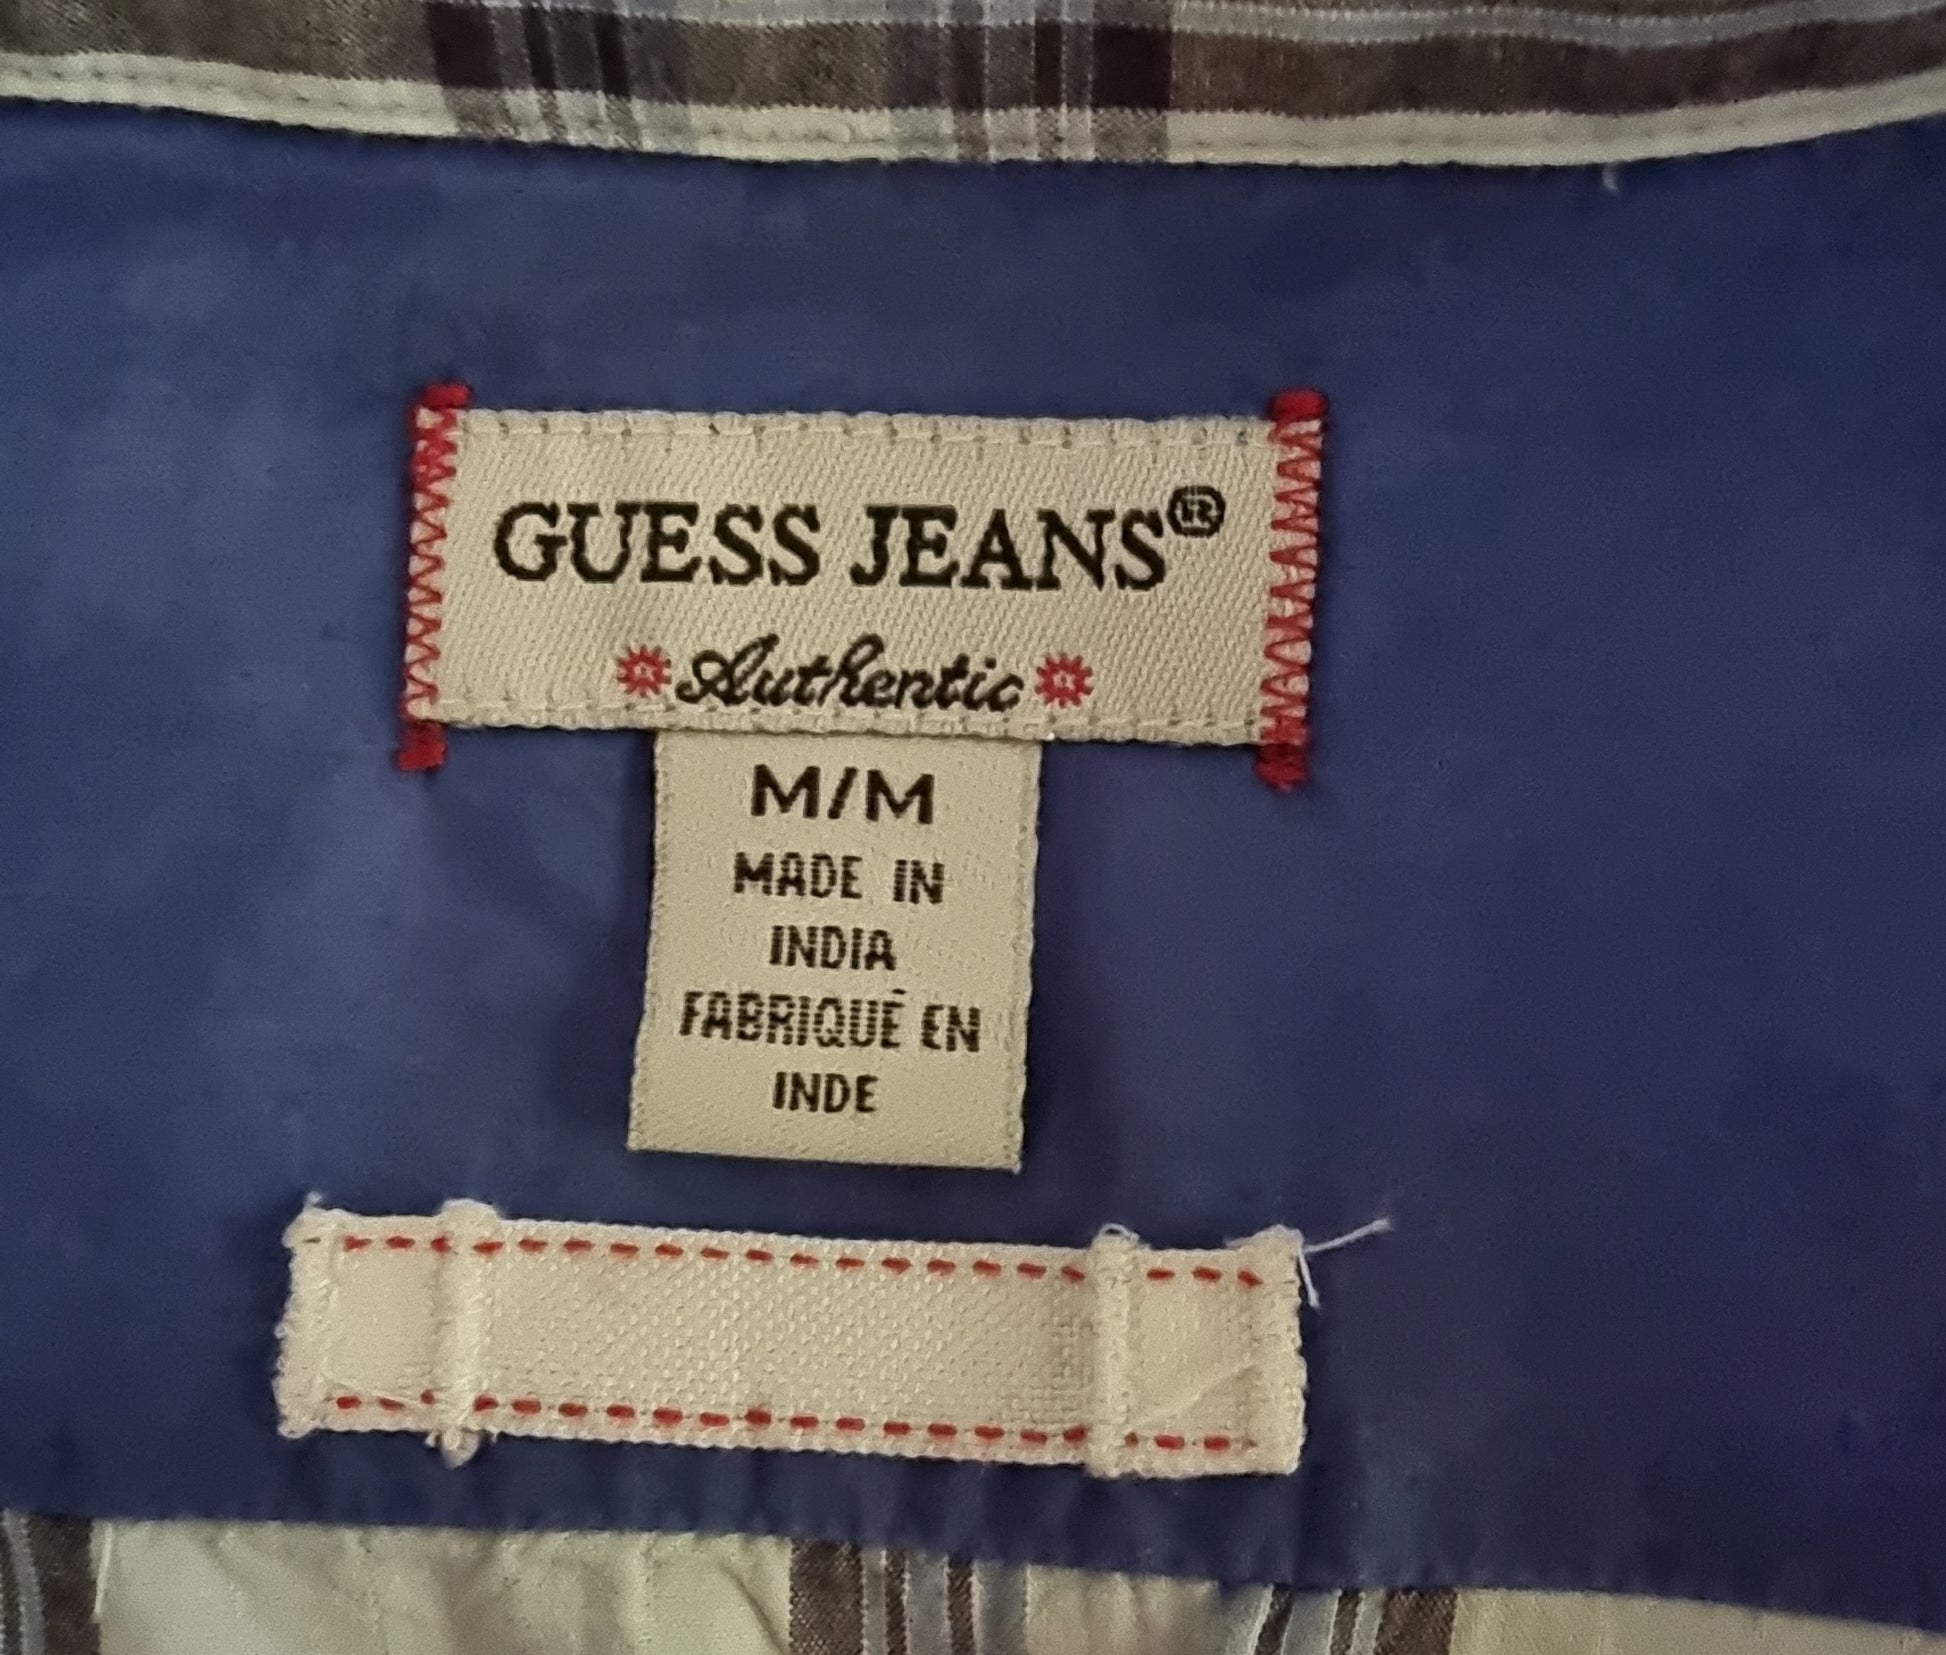 GUESS Jeans Men’s Short Sleeve Blue & White Check Shirt Size M Timeless Fashions